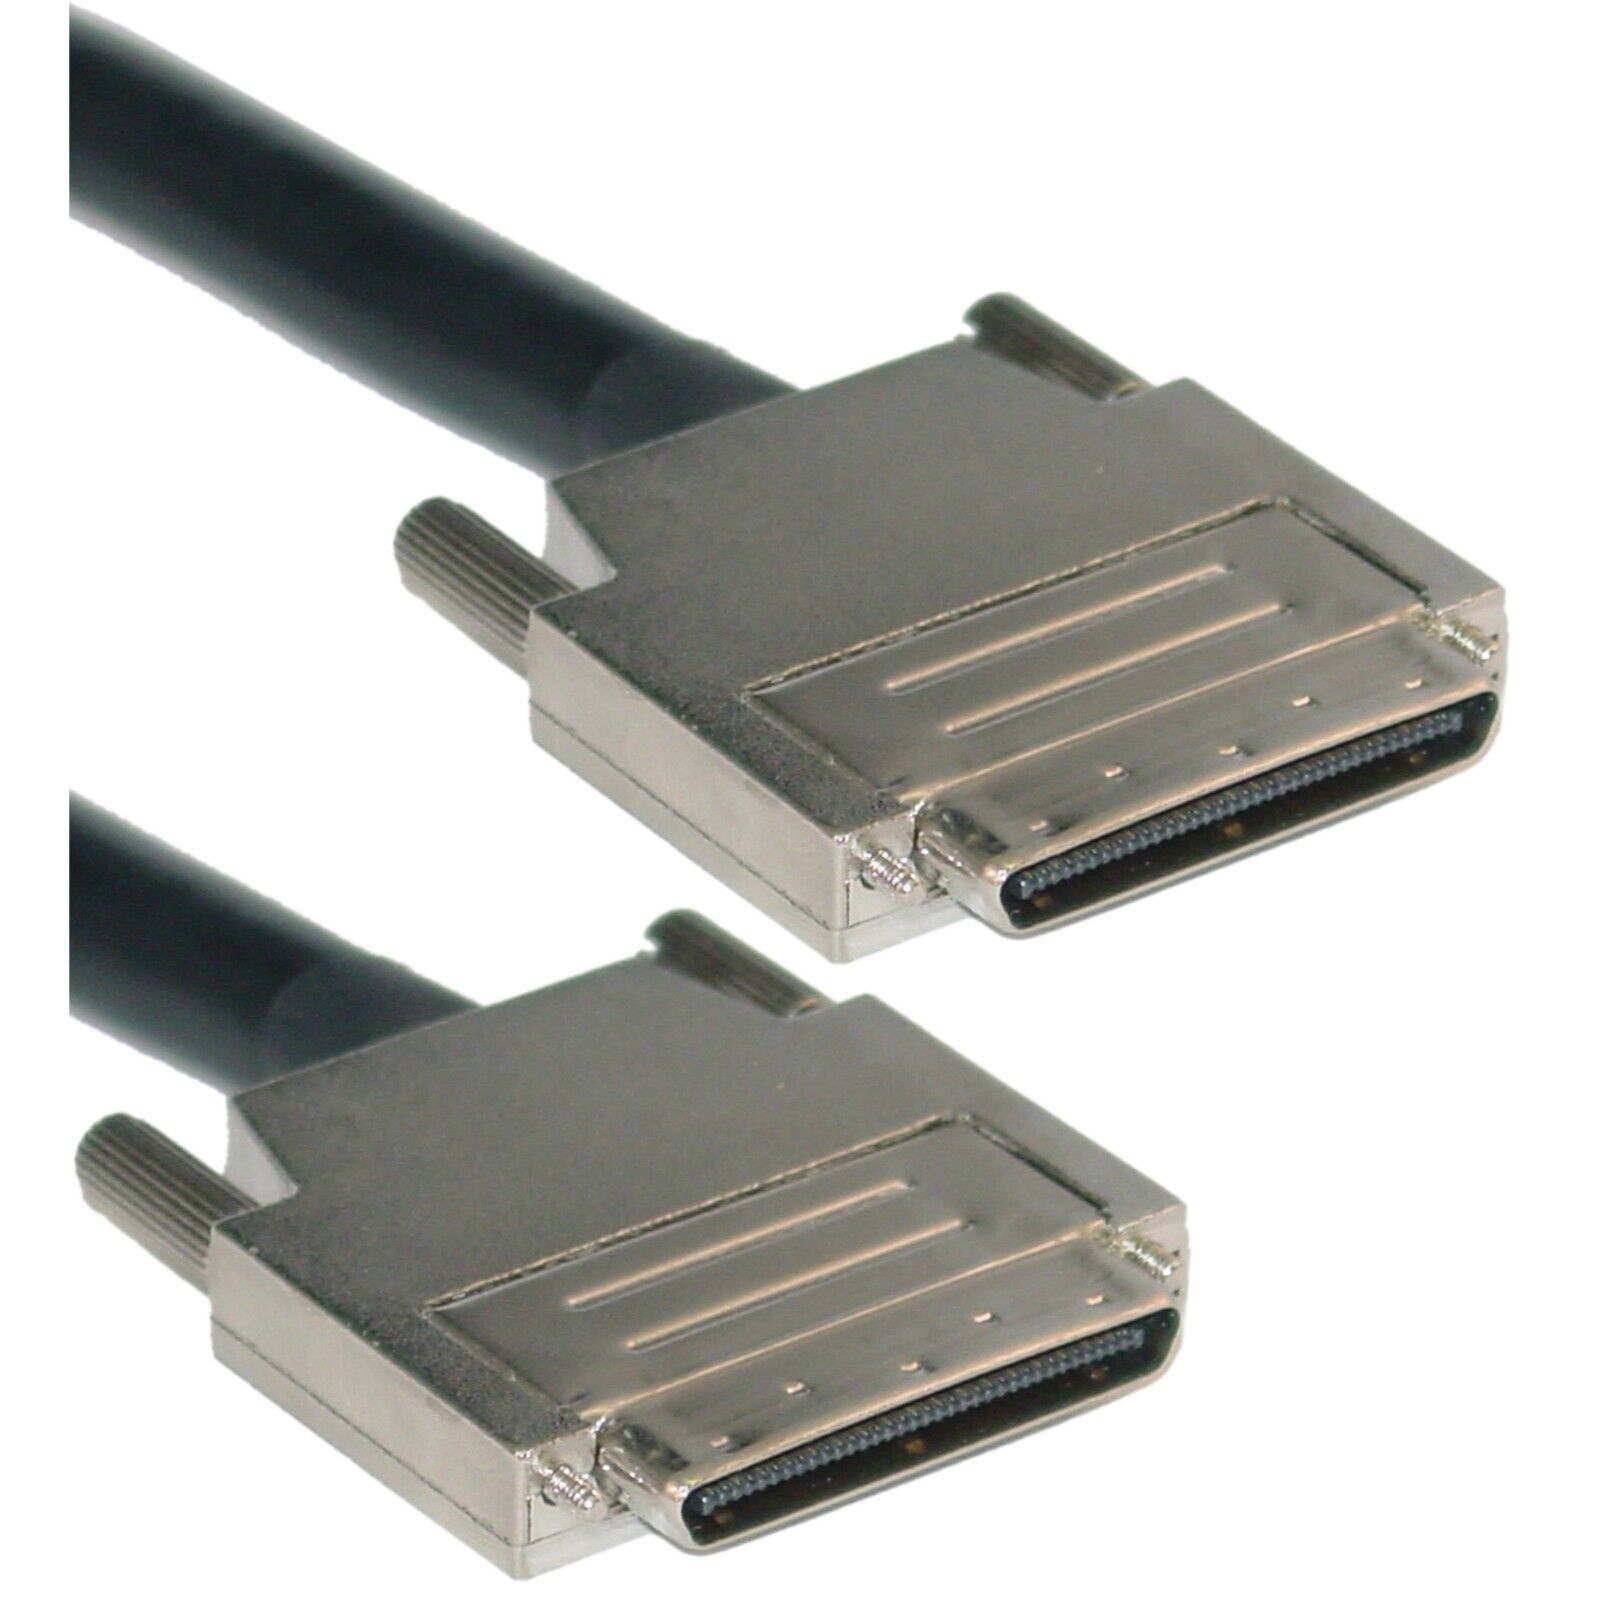 6FT SCSI III Cable, VHDCI 68 (0.8mm) Male Offset Orientation 10N3-14106